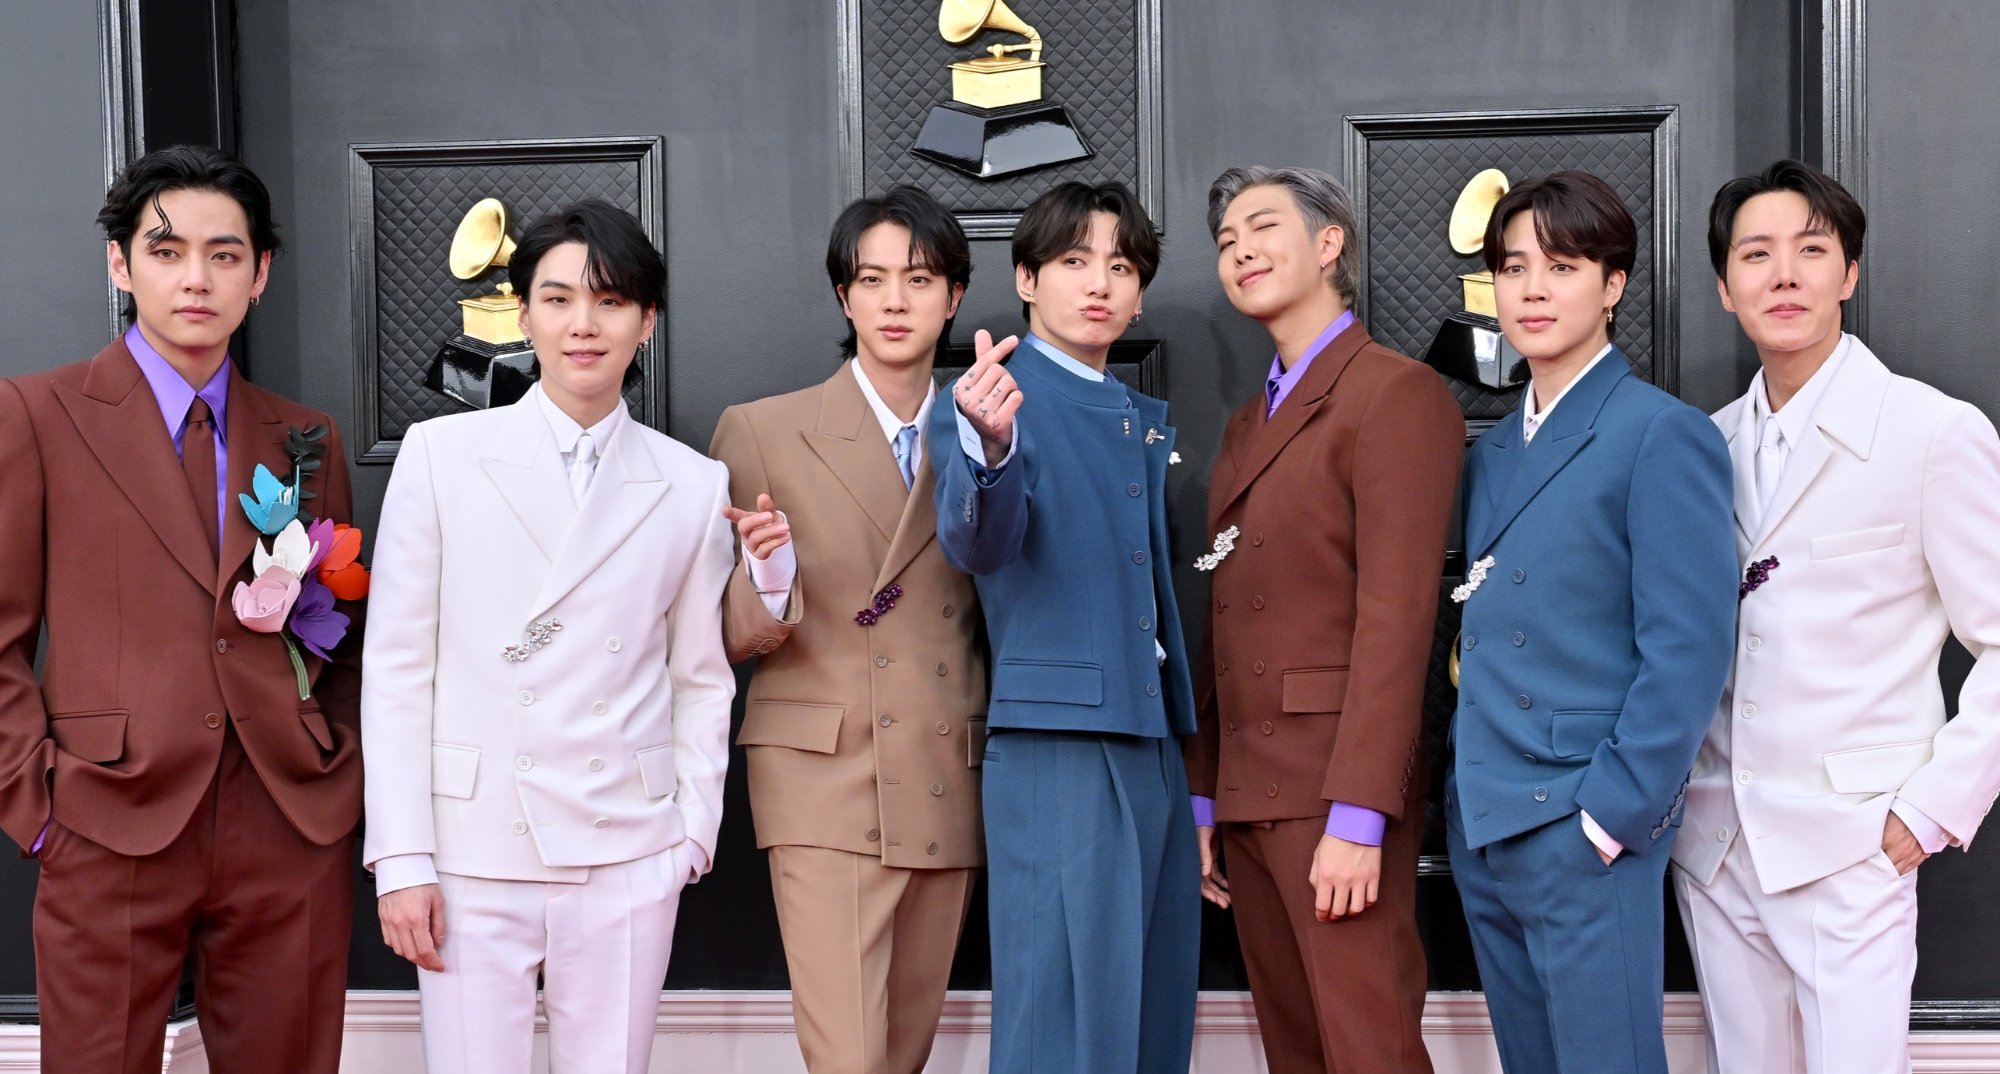 K-drama fans BTS wearing suits and posing on the red carpet at the 2022 Grammy Awards.
